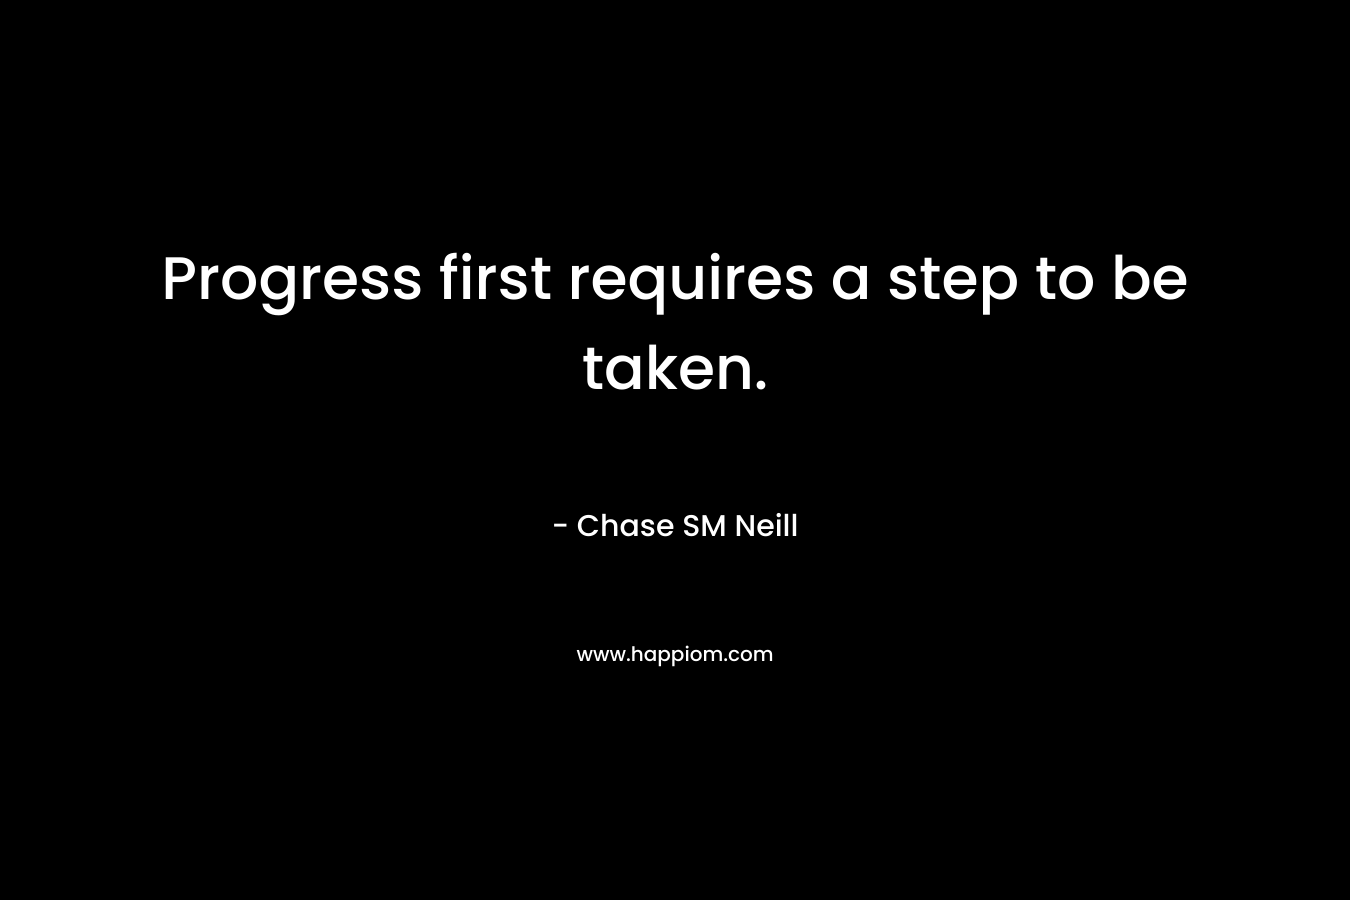 Progress first requires a step to be taken.